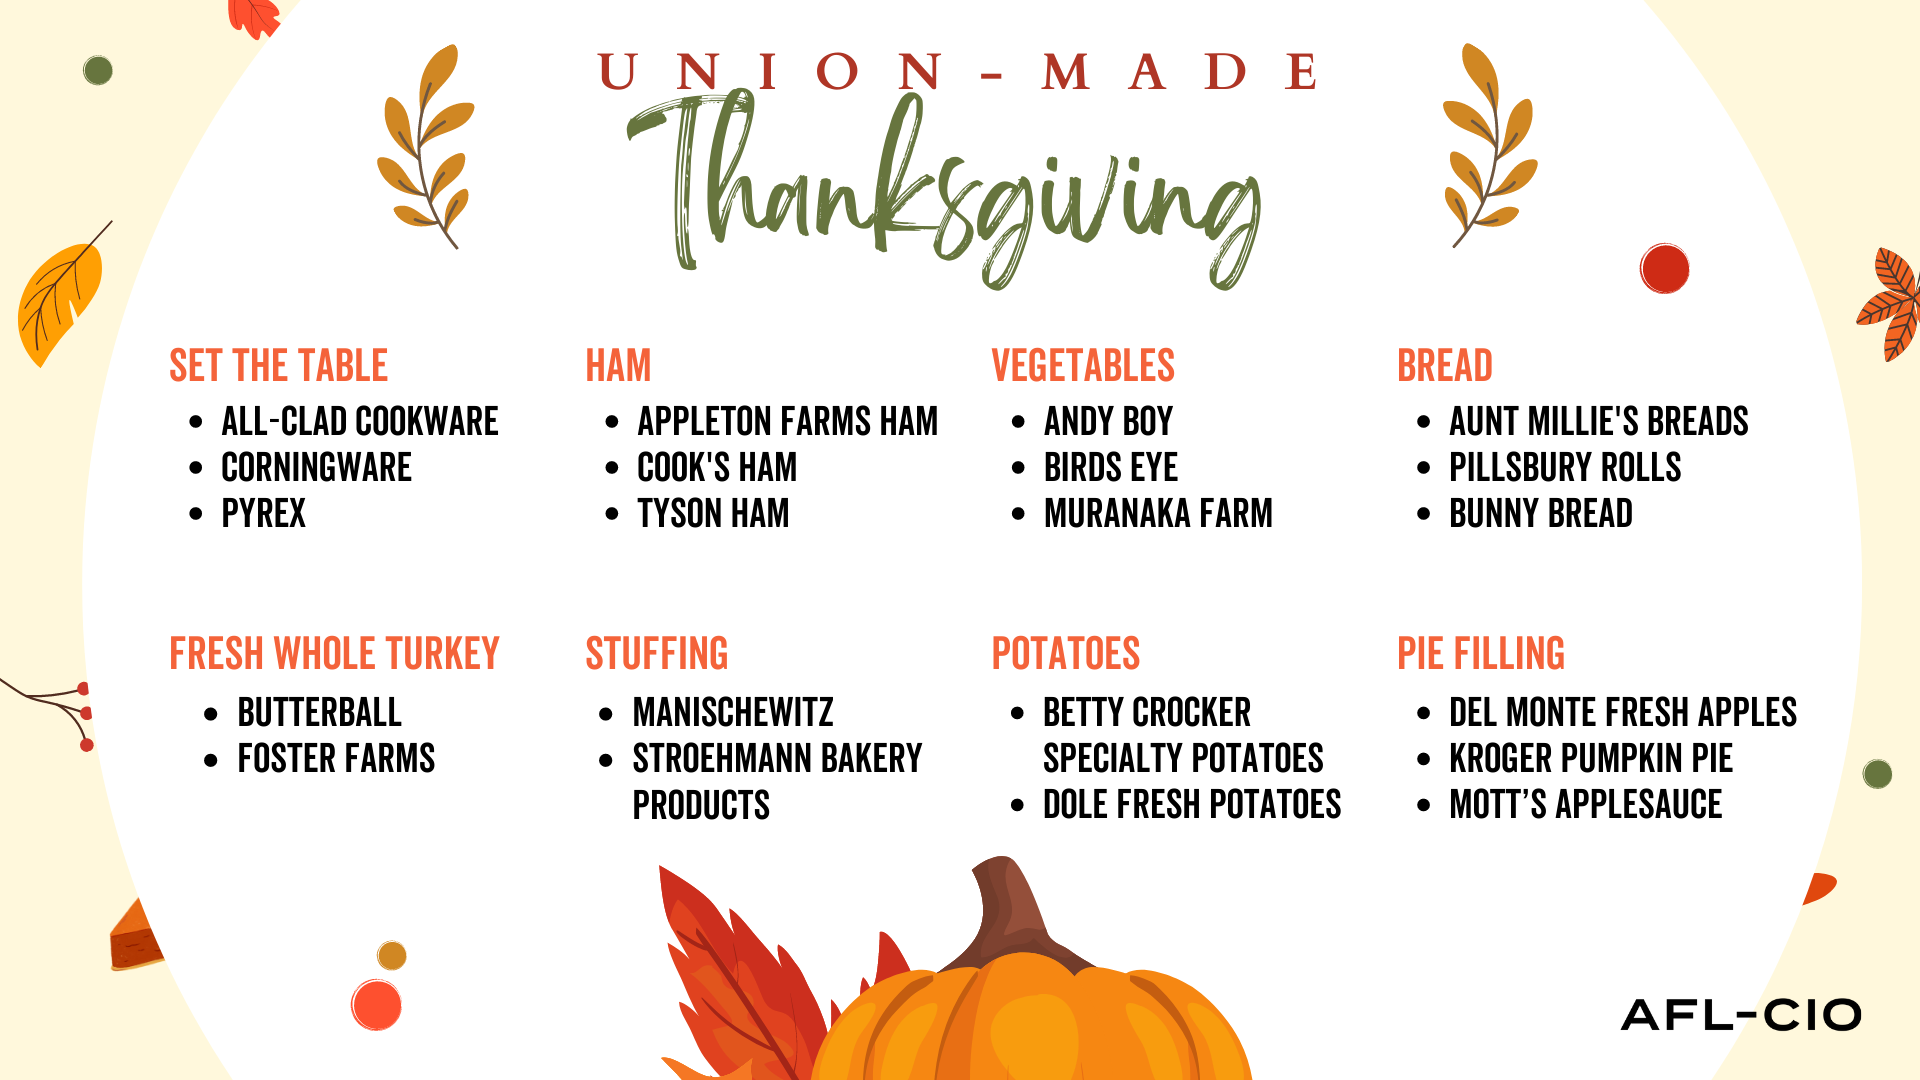 A list of union-made Thanksgiving products